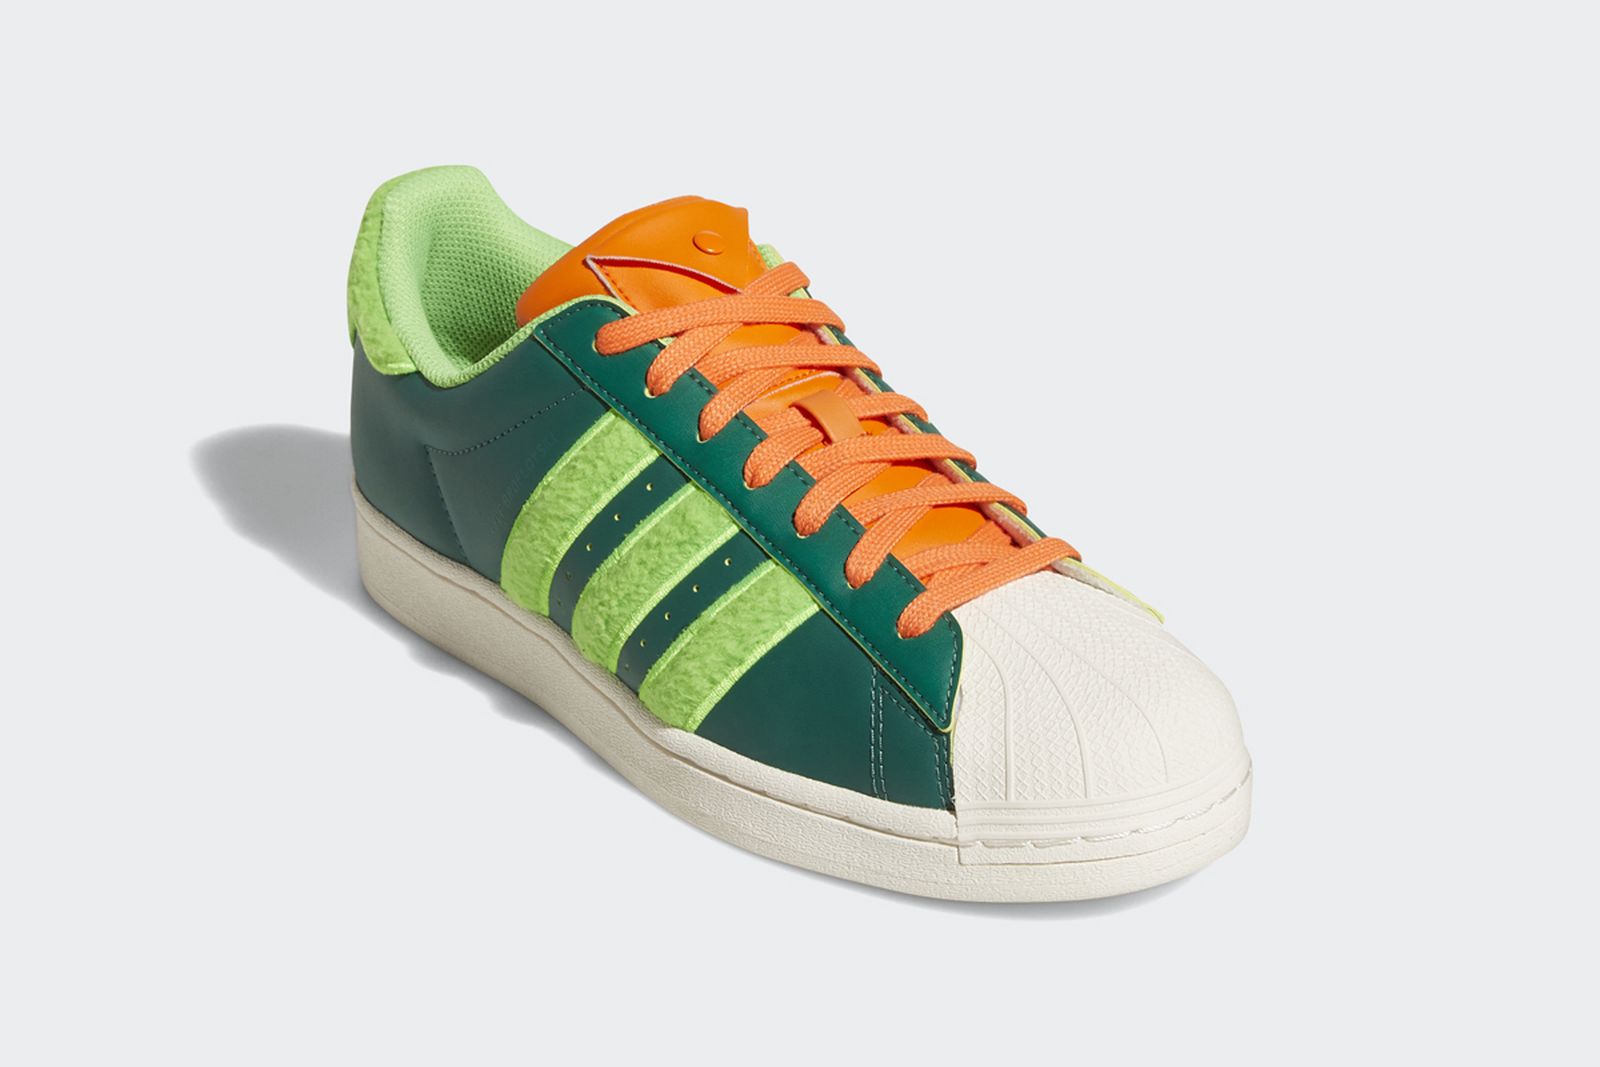 south-park-adidas-shoes-release-date-collection (43)